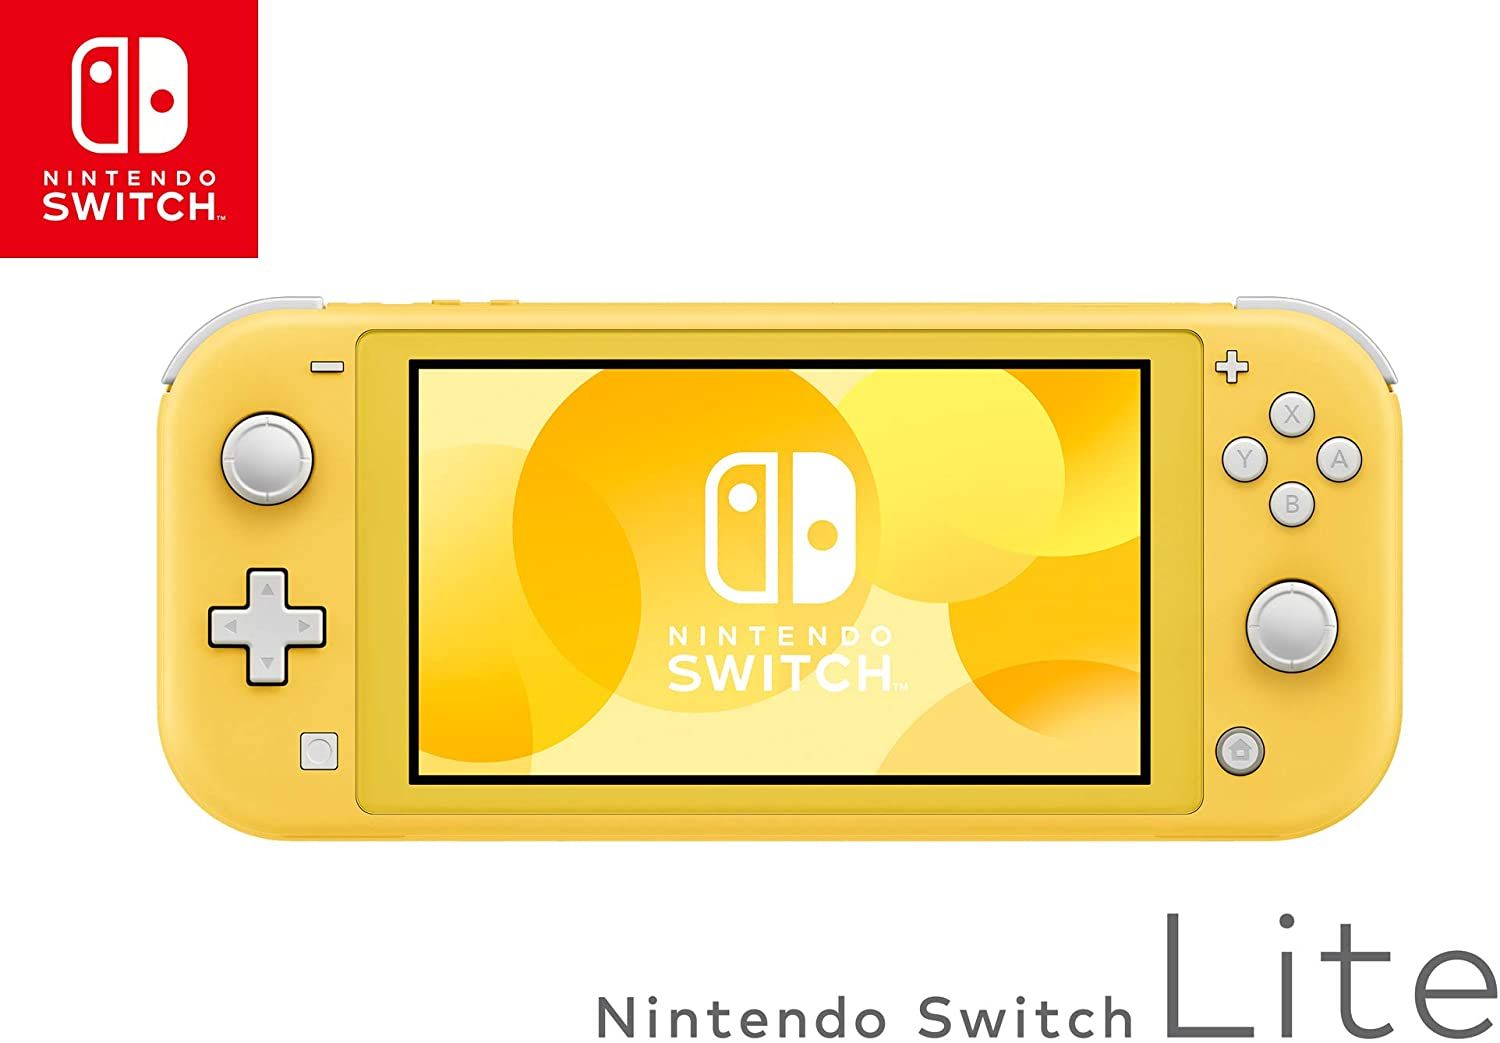 A yellow-colored Nintendo Switch Lite